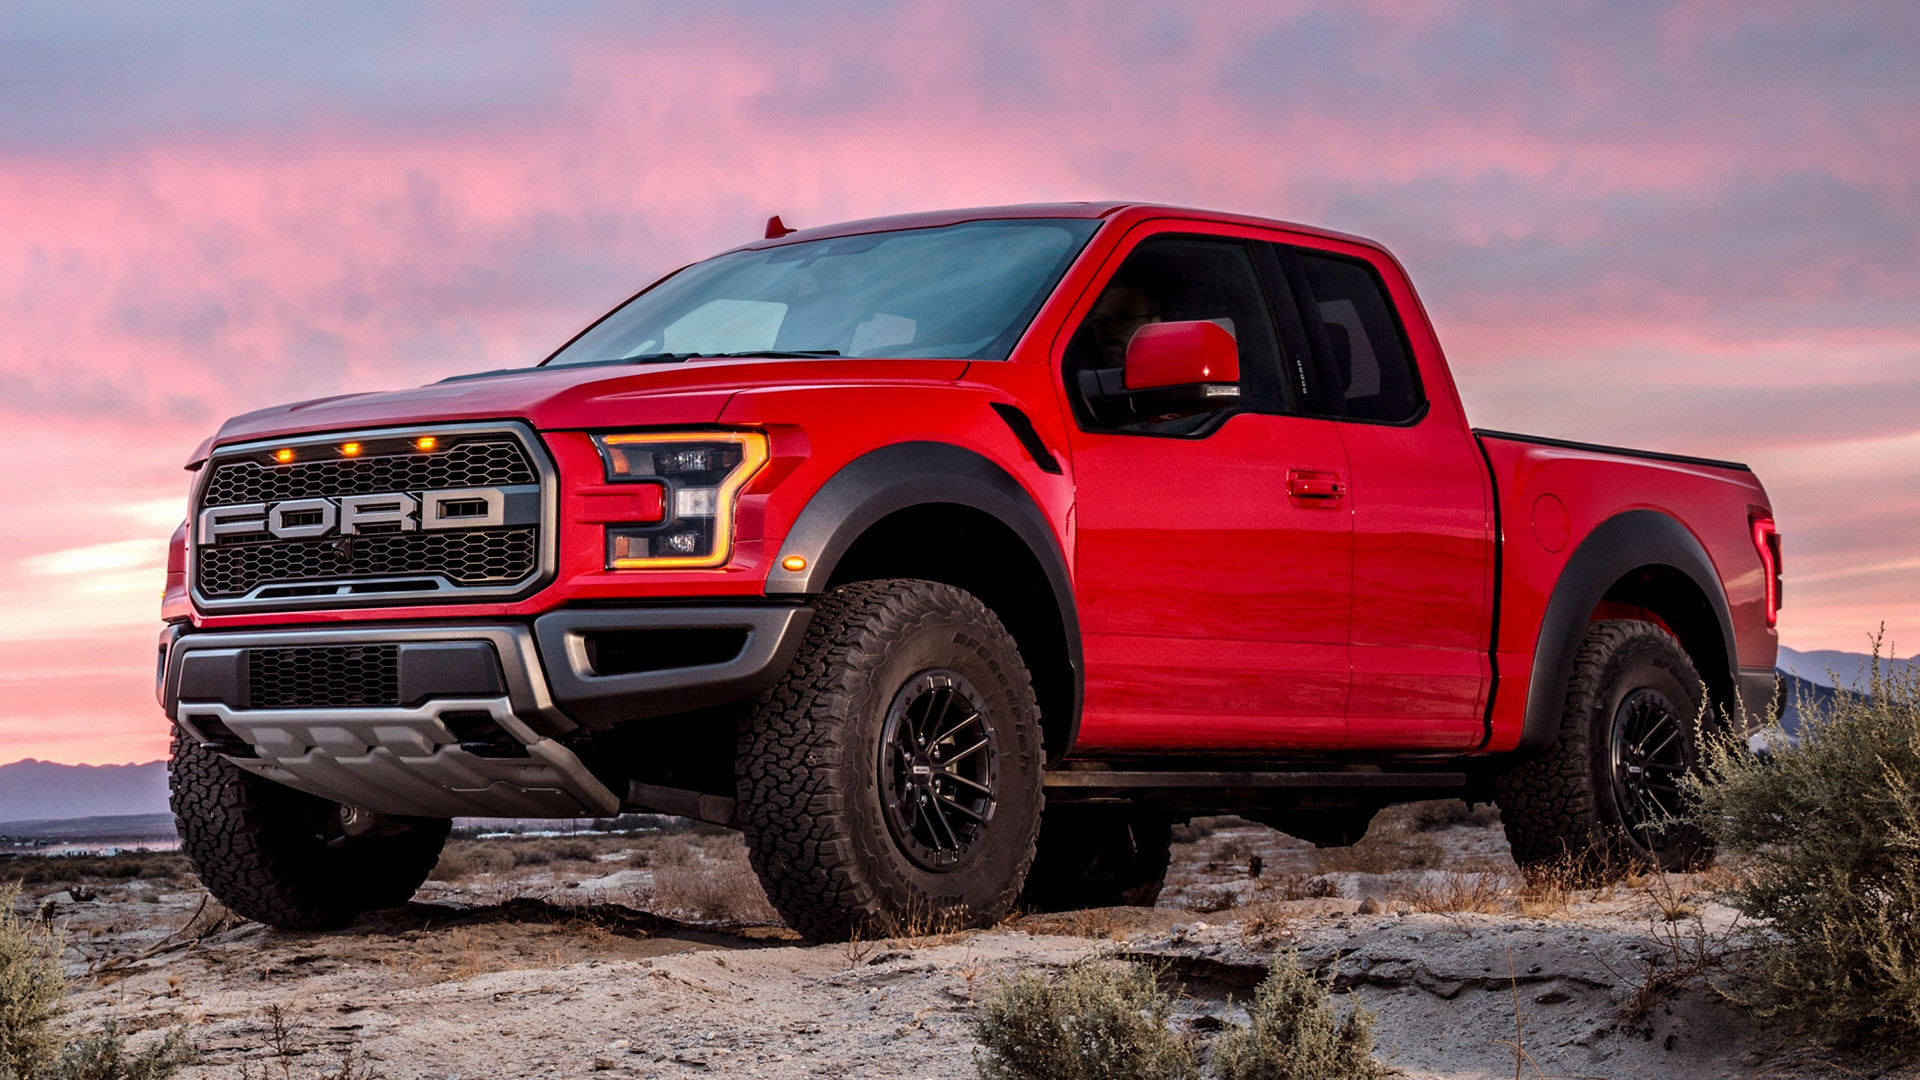 Cool Ford Raptor Wallpapers - Posted june 5, 2019 yl computing